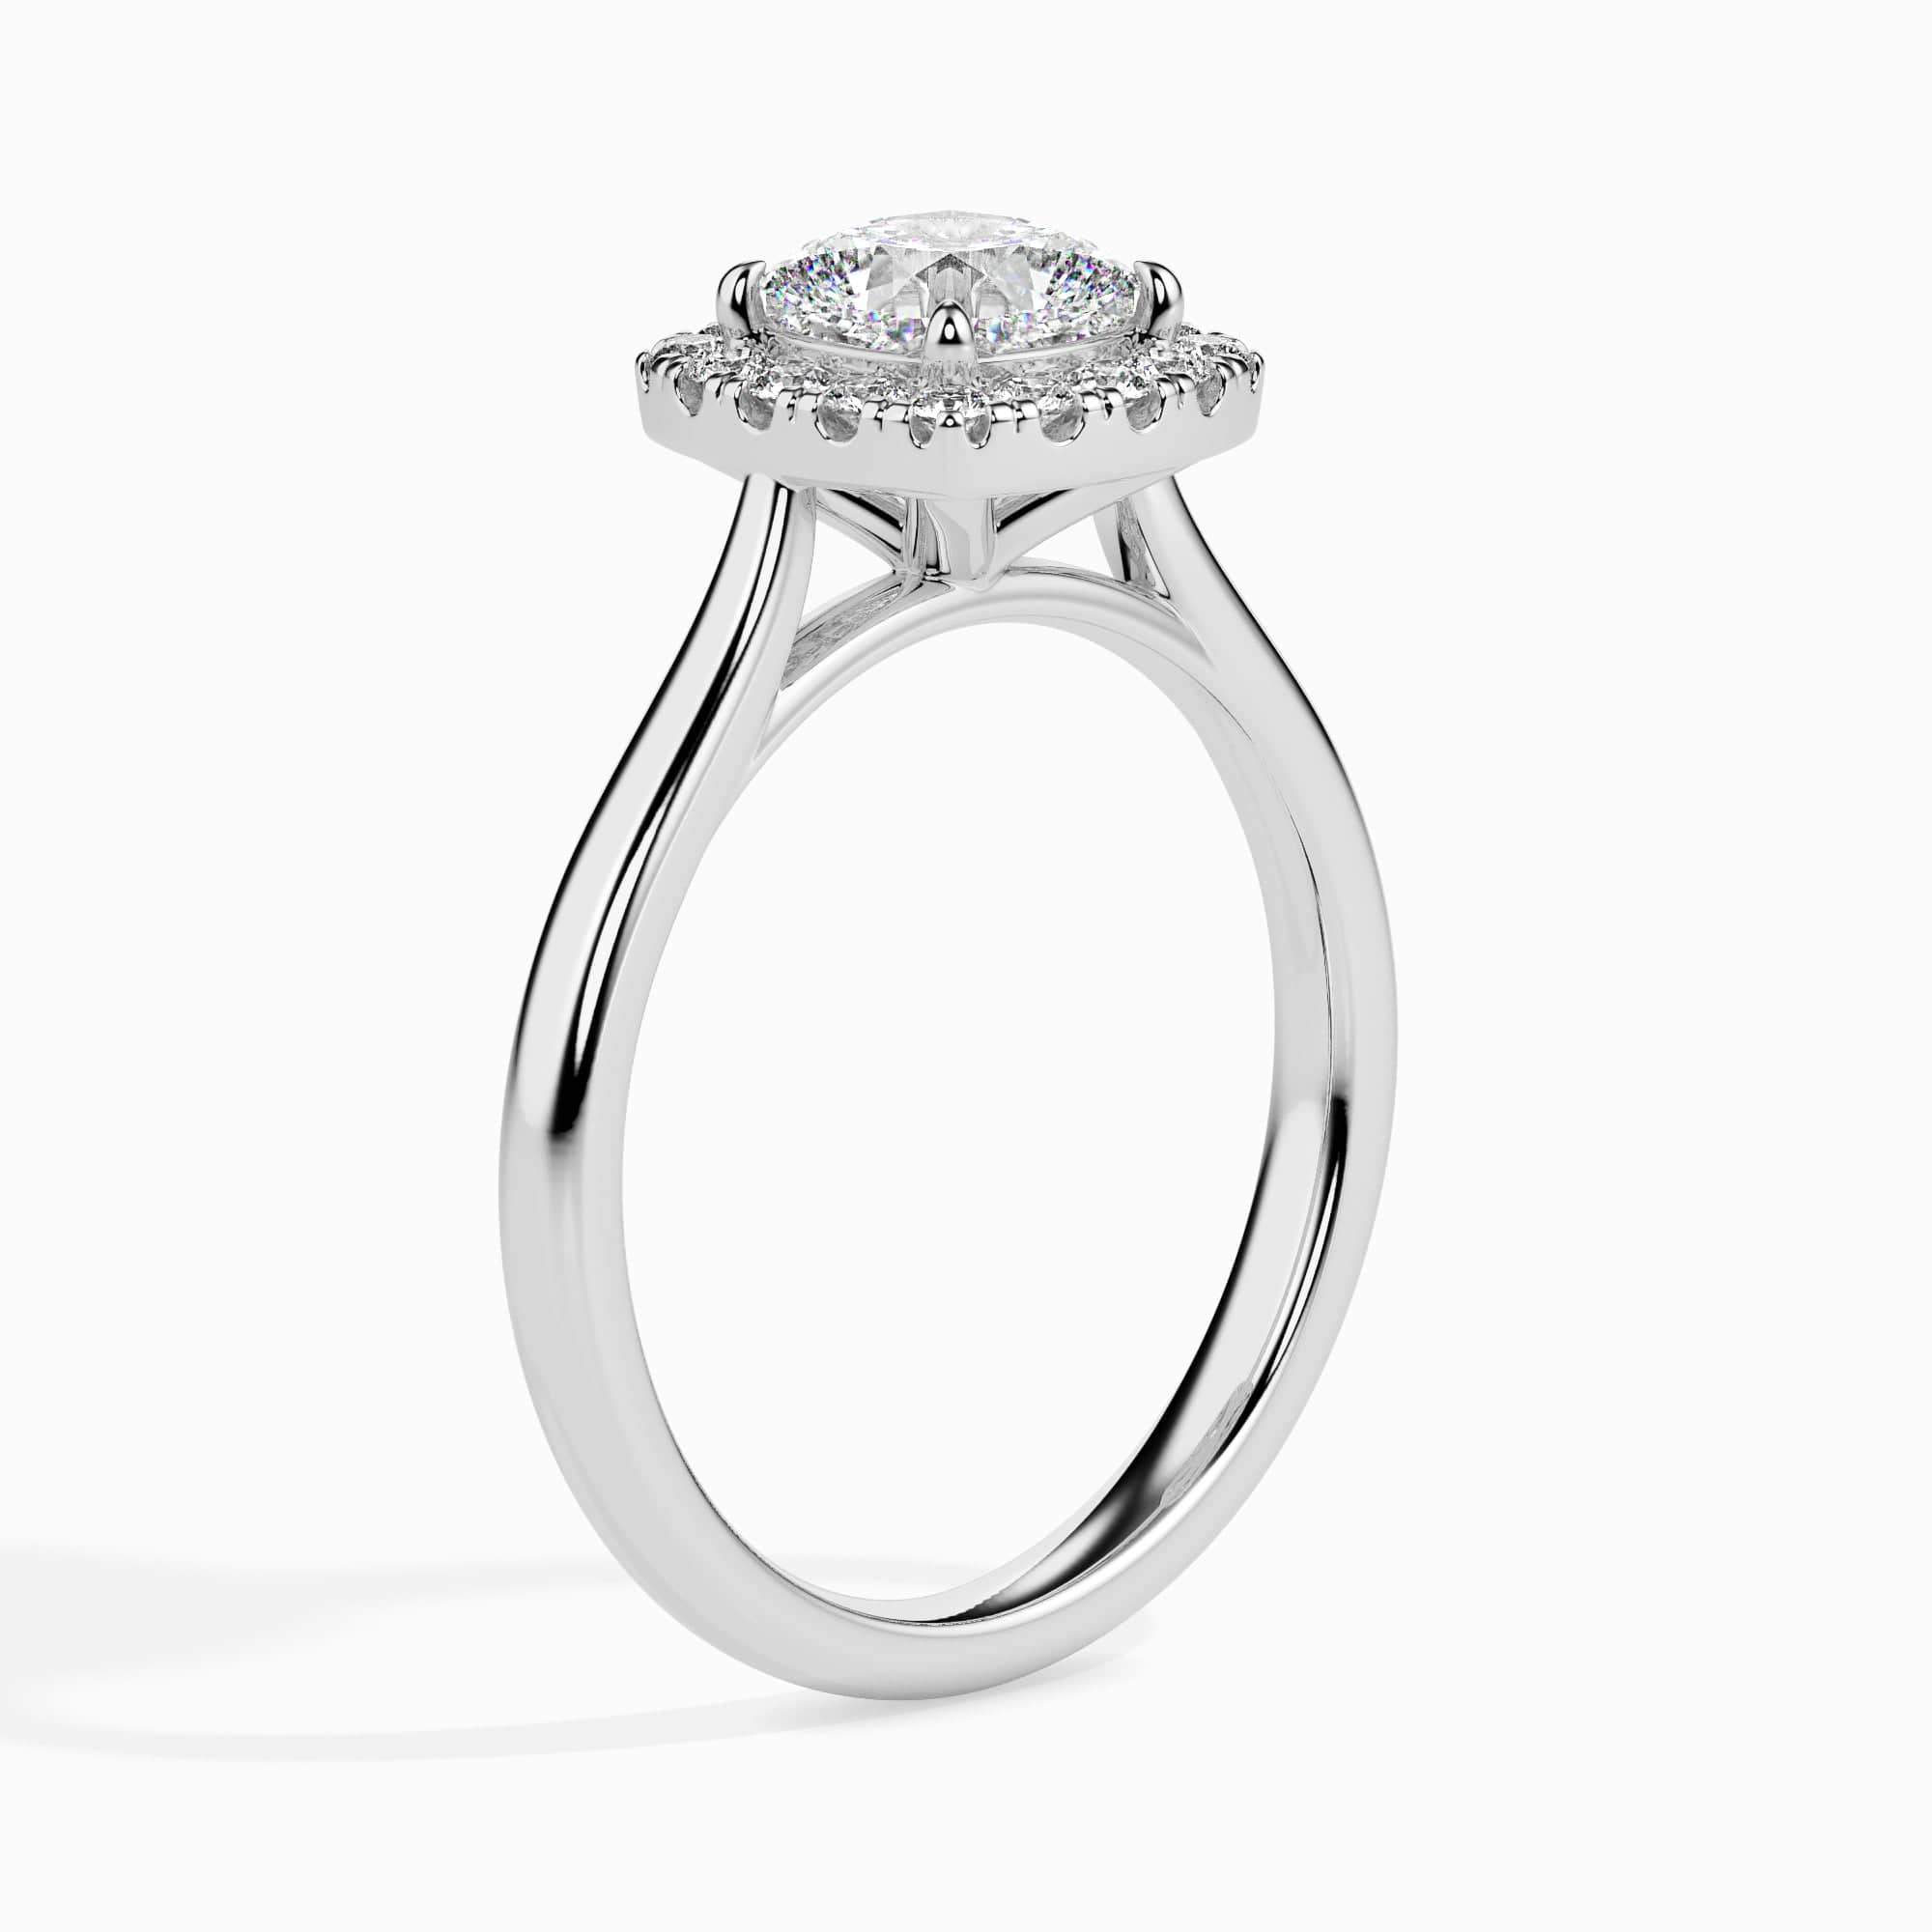 3.55ct Pear Cut White Diamond Tiffany Solitaire Engagement Wedding Rings,  Six Cross Prong Set Rings, Bridal Sets Rings, Ring for Women,rings - Etsy